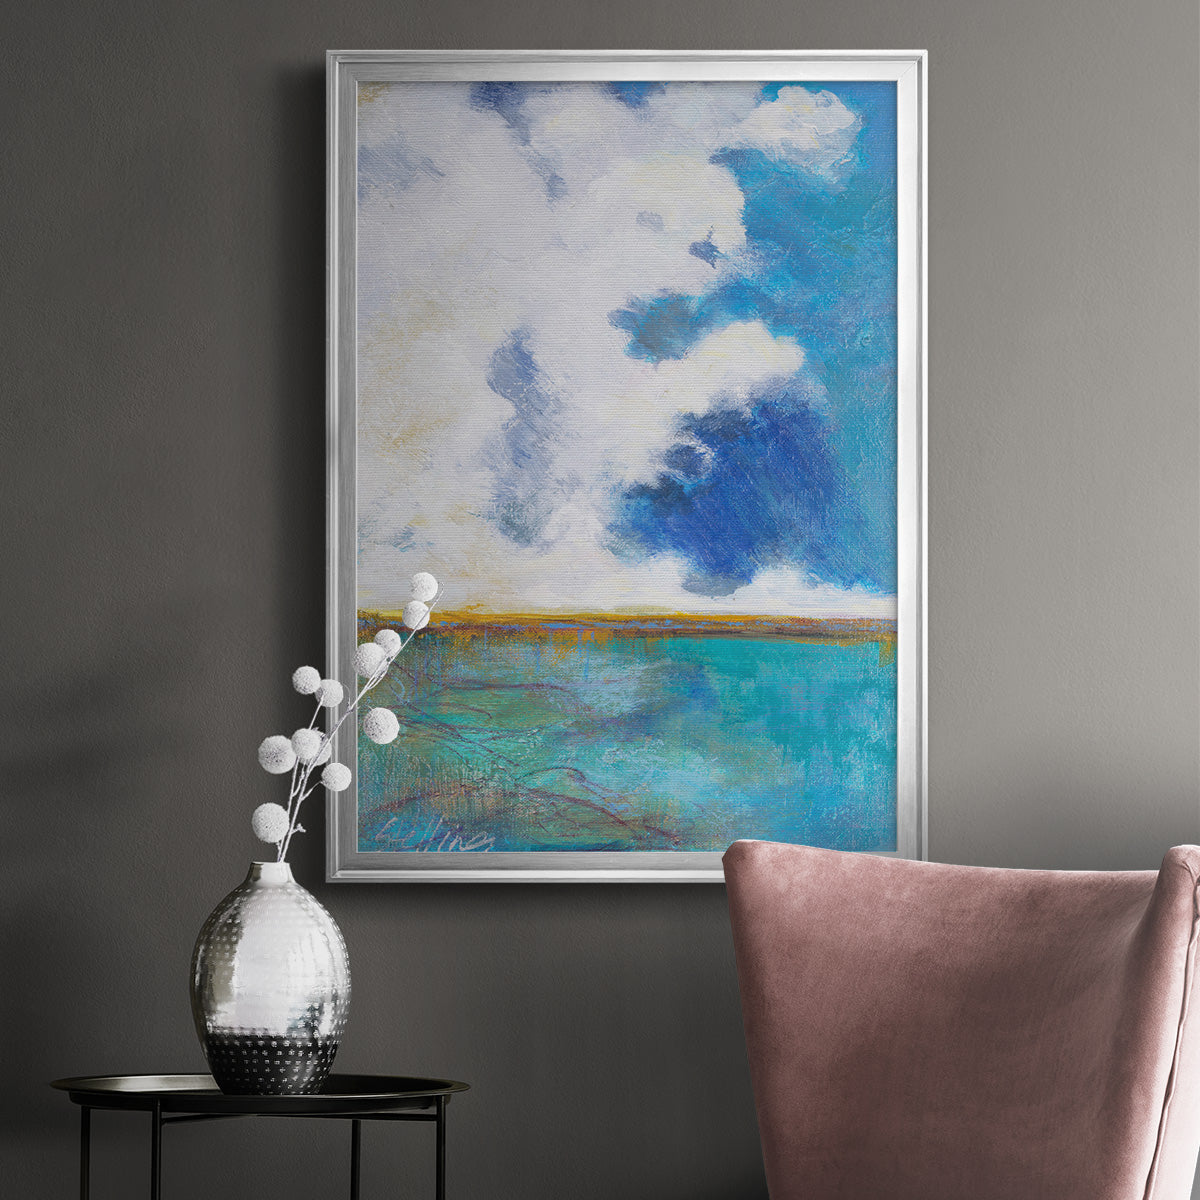 Mistrall Premium Framed Print - Ready to Hang